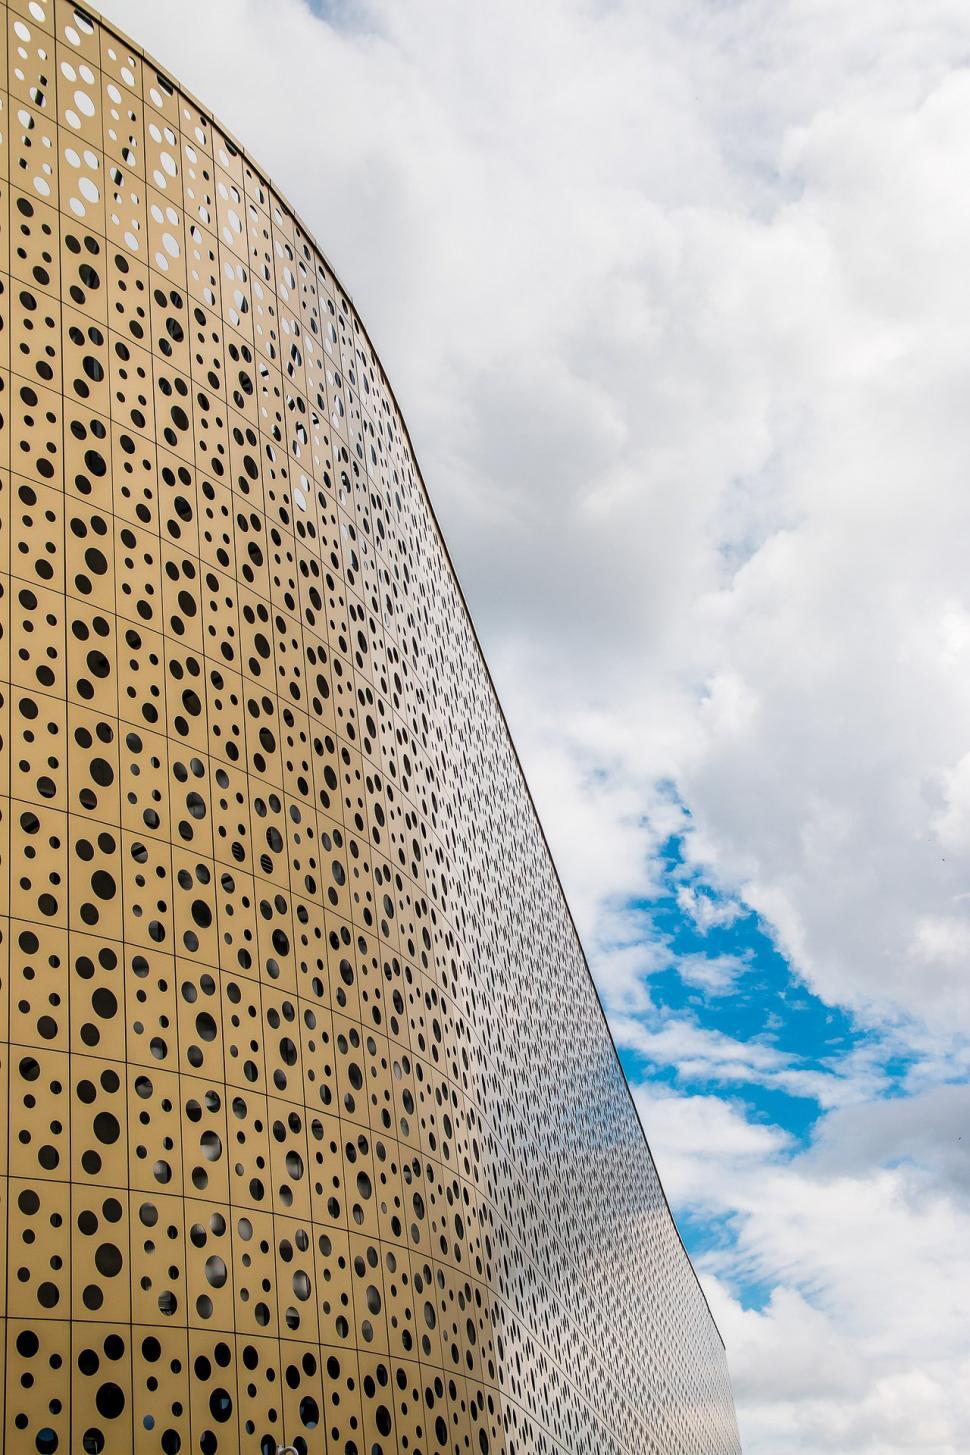 Free Image of Tall Building With Holes 